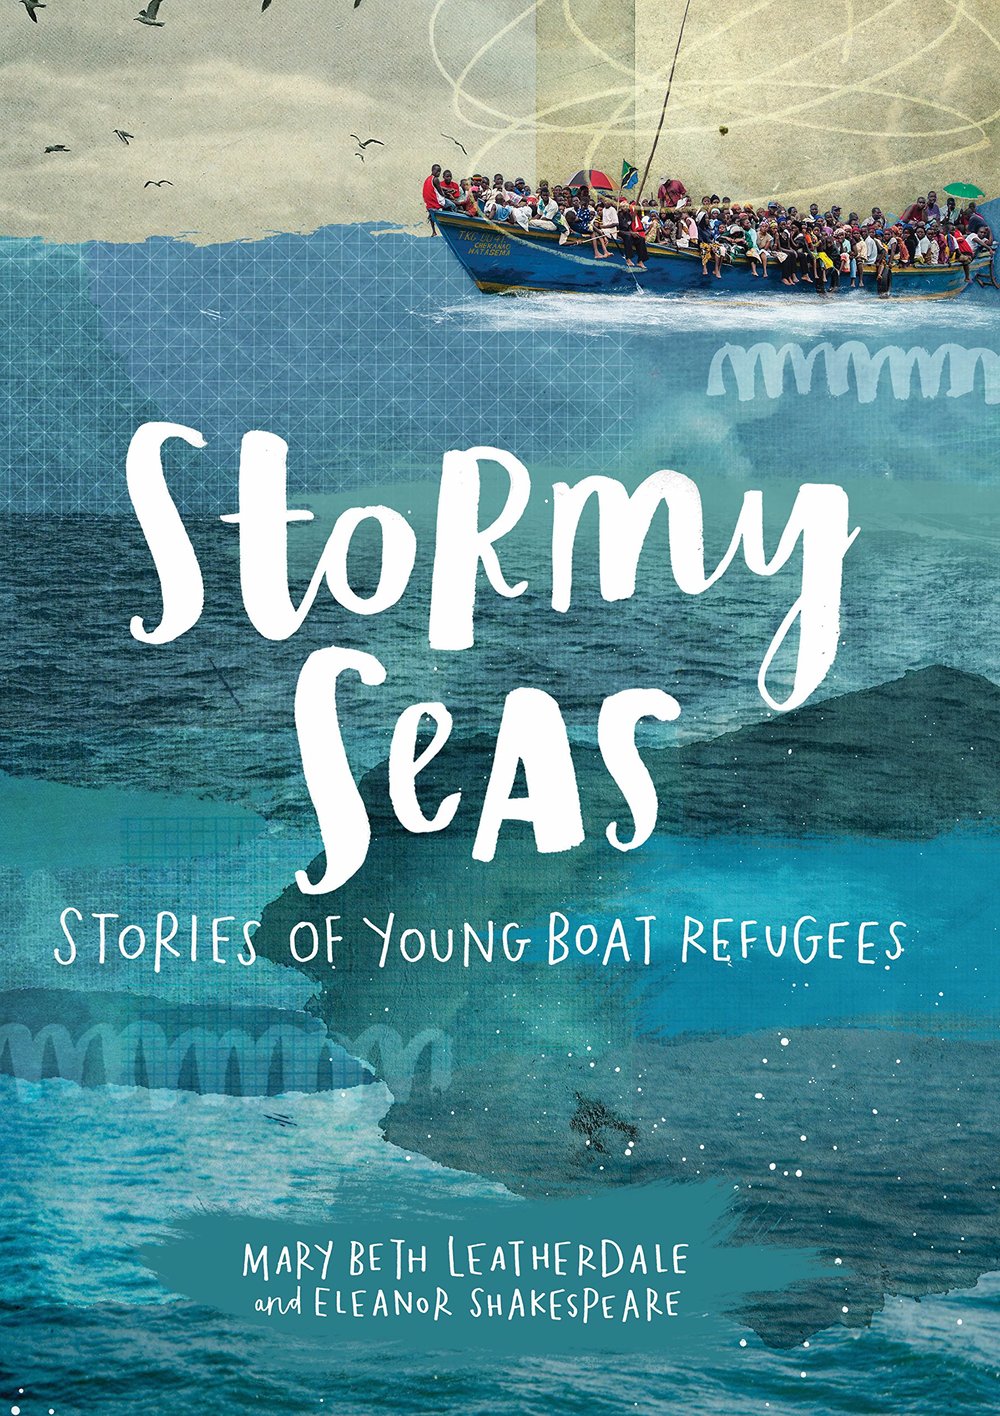 Stormy Seas: Stories of Young Boat Refugees, by Mary Beth Leatherdale